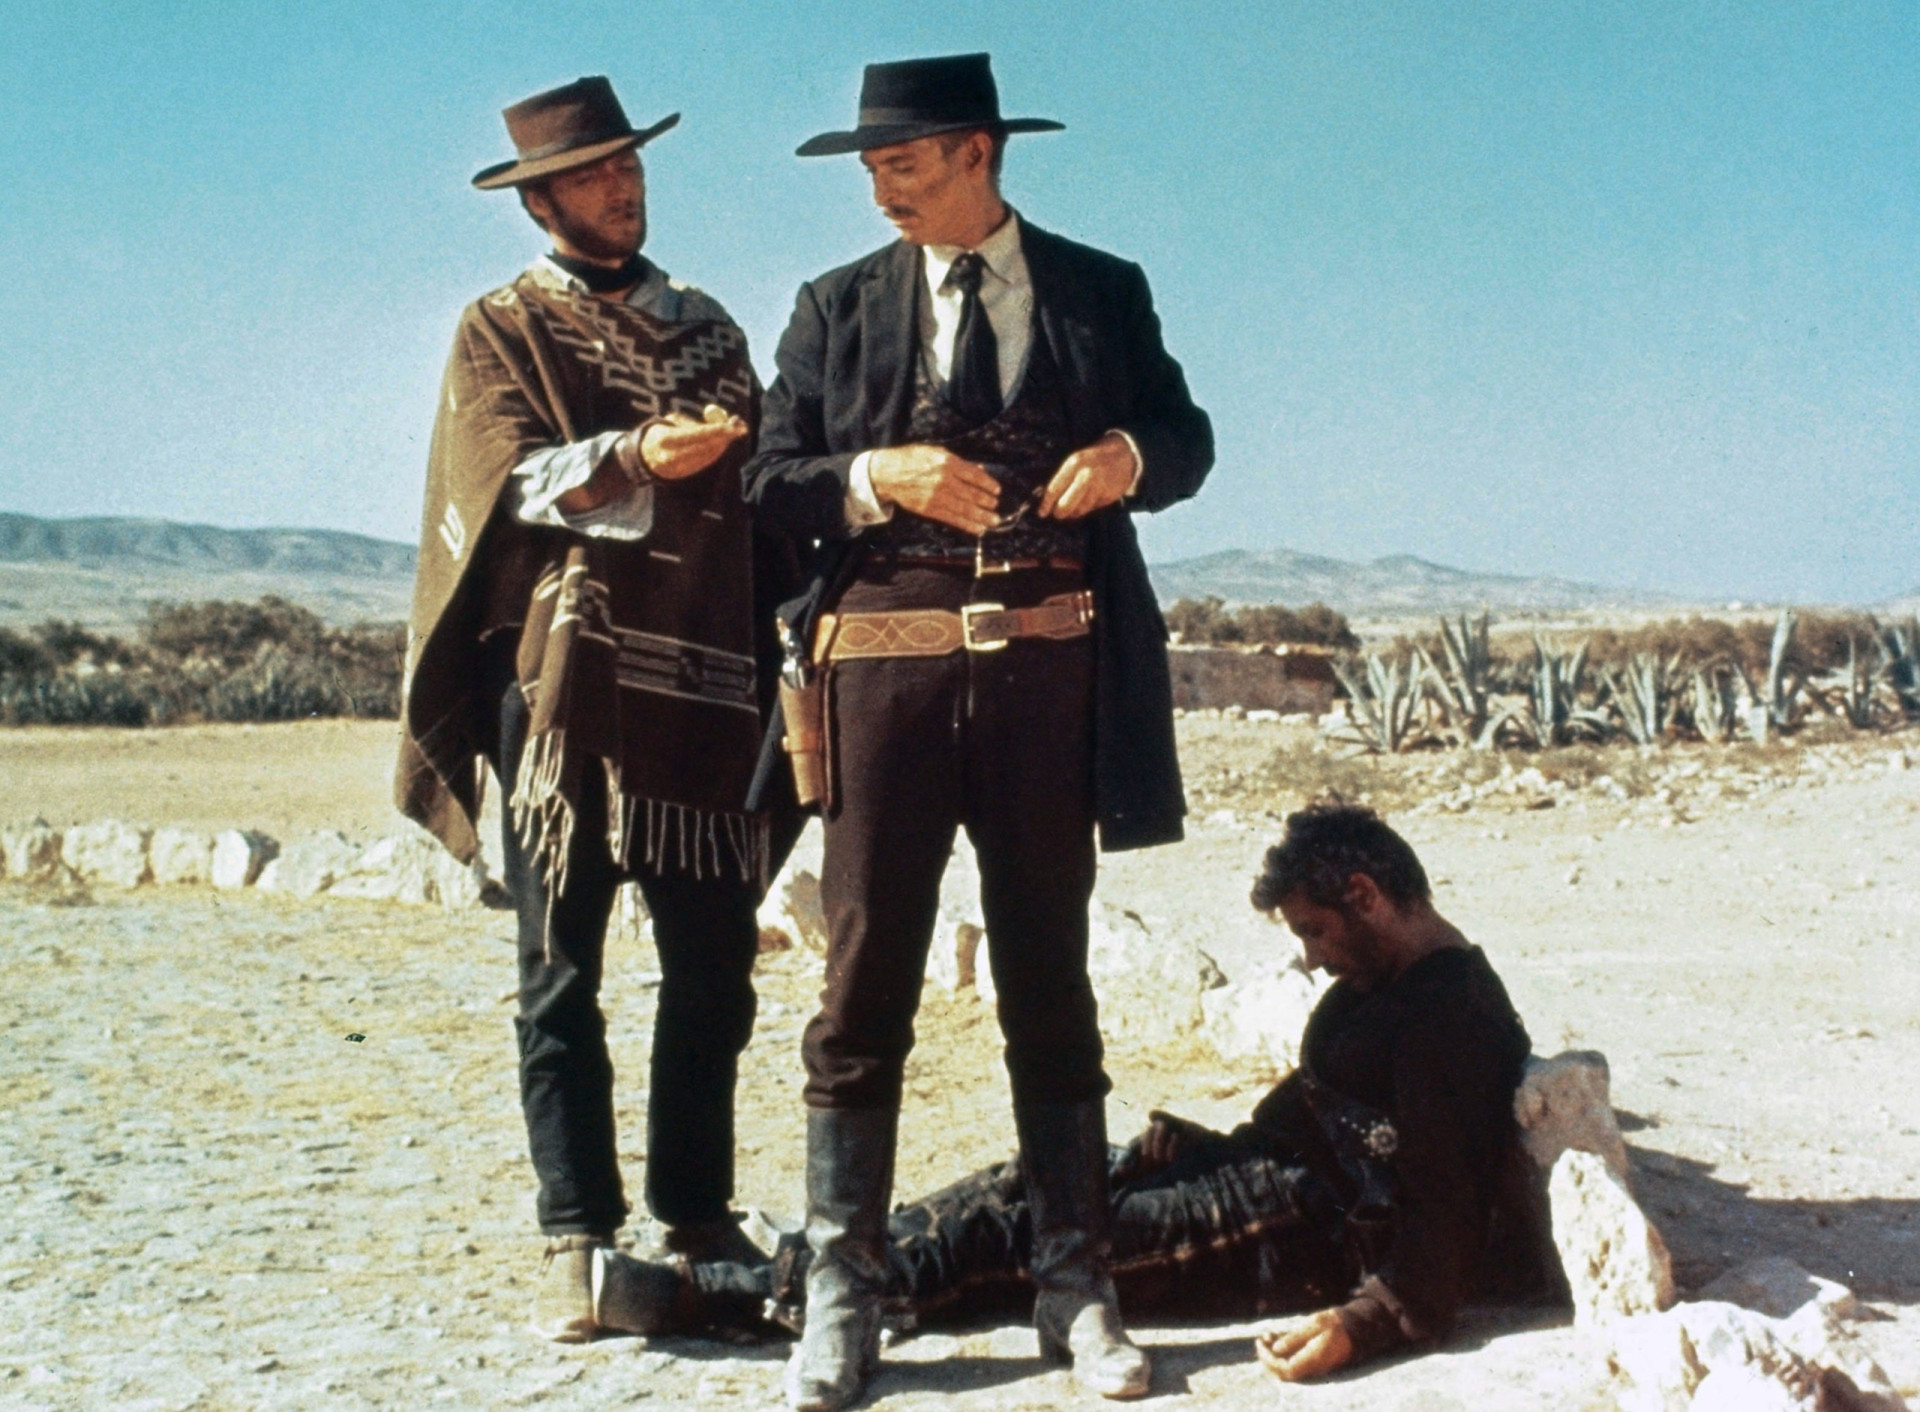 <p>Designed by Carlo Simi for Sergio Leone's groundbreaking "dollar" series, the authentic-looking American desert town was also used for the sequel, 'For a Few Dollars More.'</p><p>You may also like:<a href="https://www.starsinsider.com/n/450359?utm_source=msn.com&utm_medium=display&utm_campaign=referral_description&utm_content=570754en-en"> The royal weddings that changed European history</a></p>